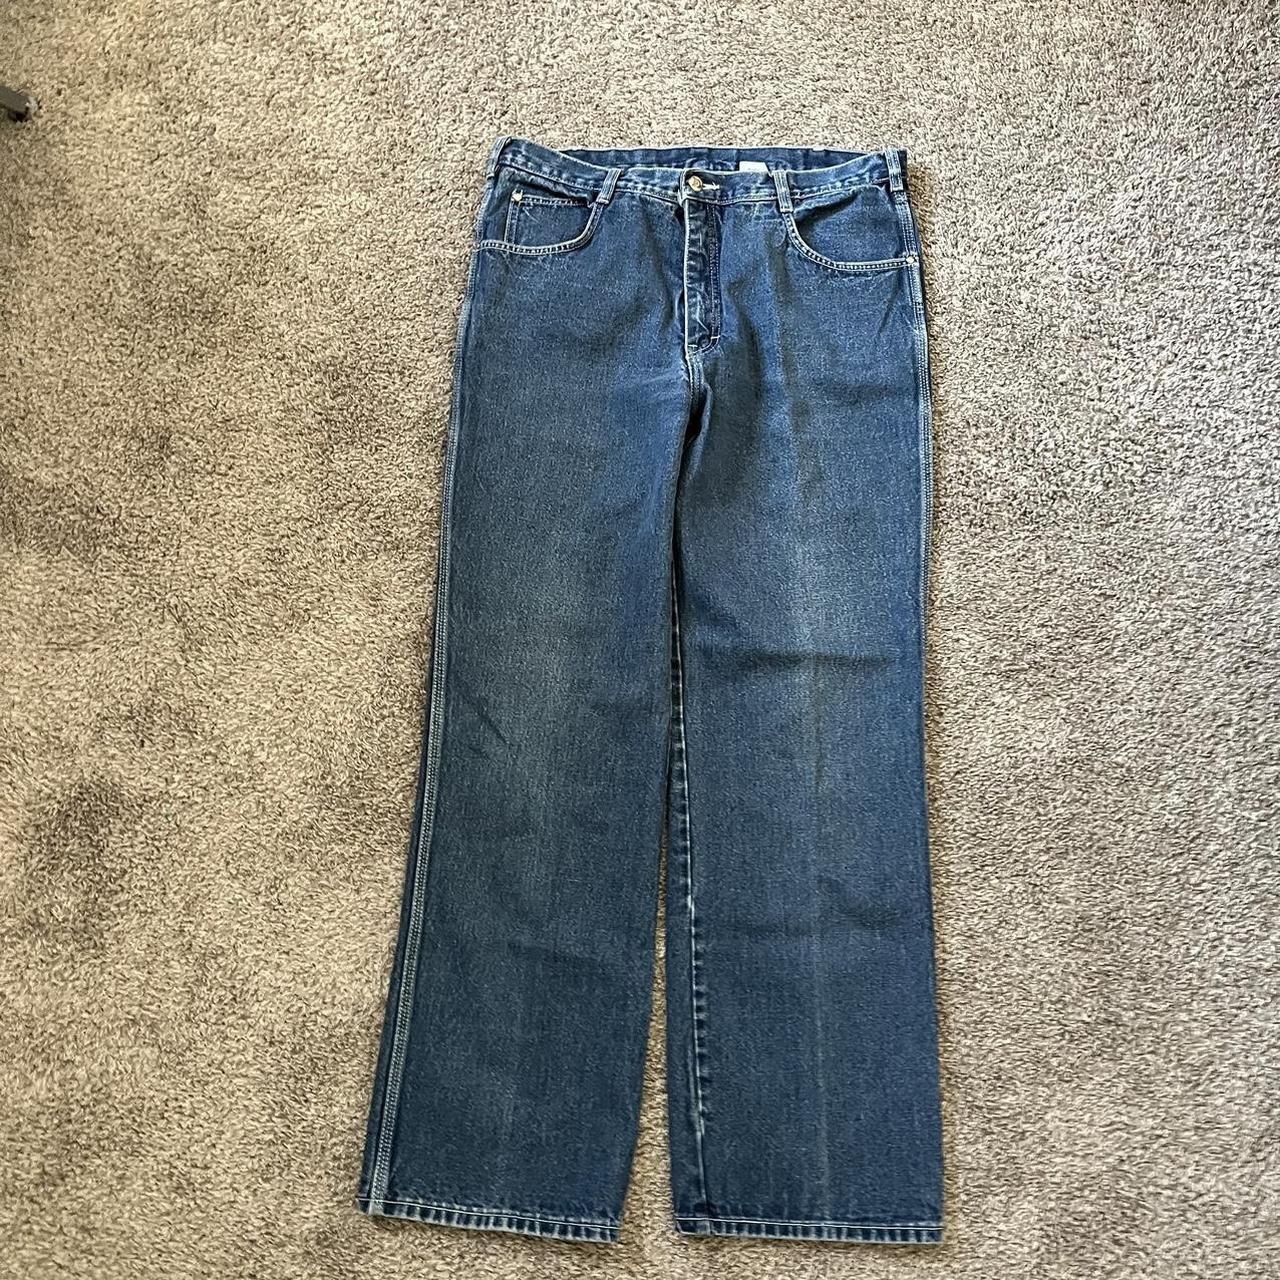 Insane pair of y2k embroidered jeans, really nice... - Depop